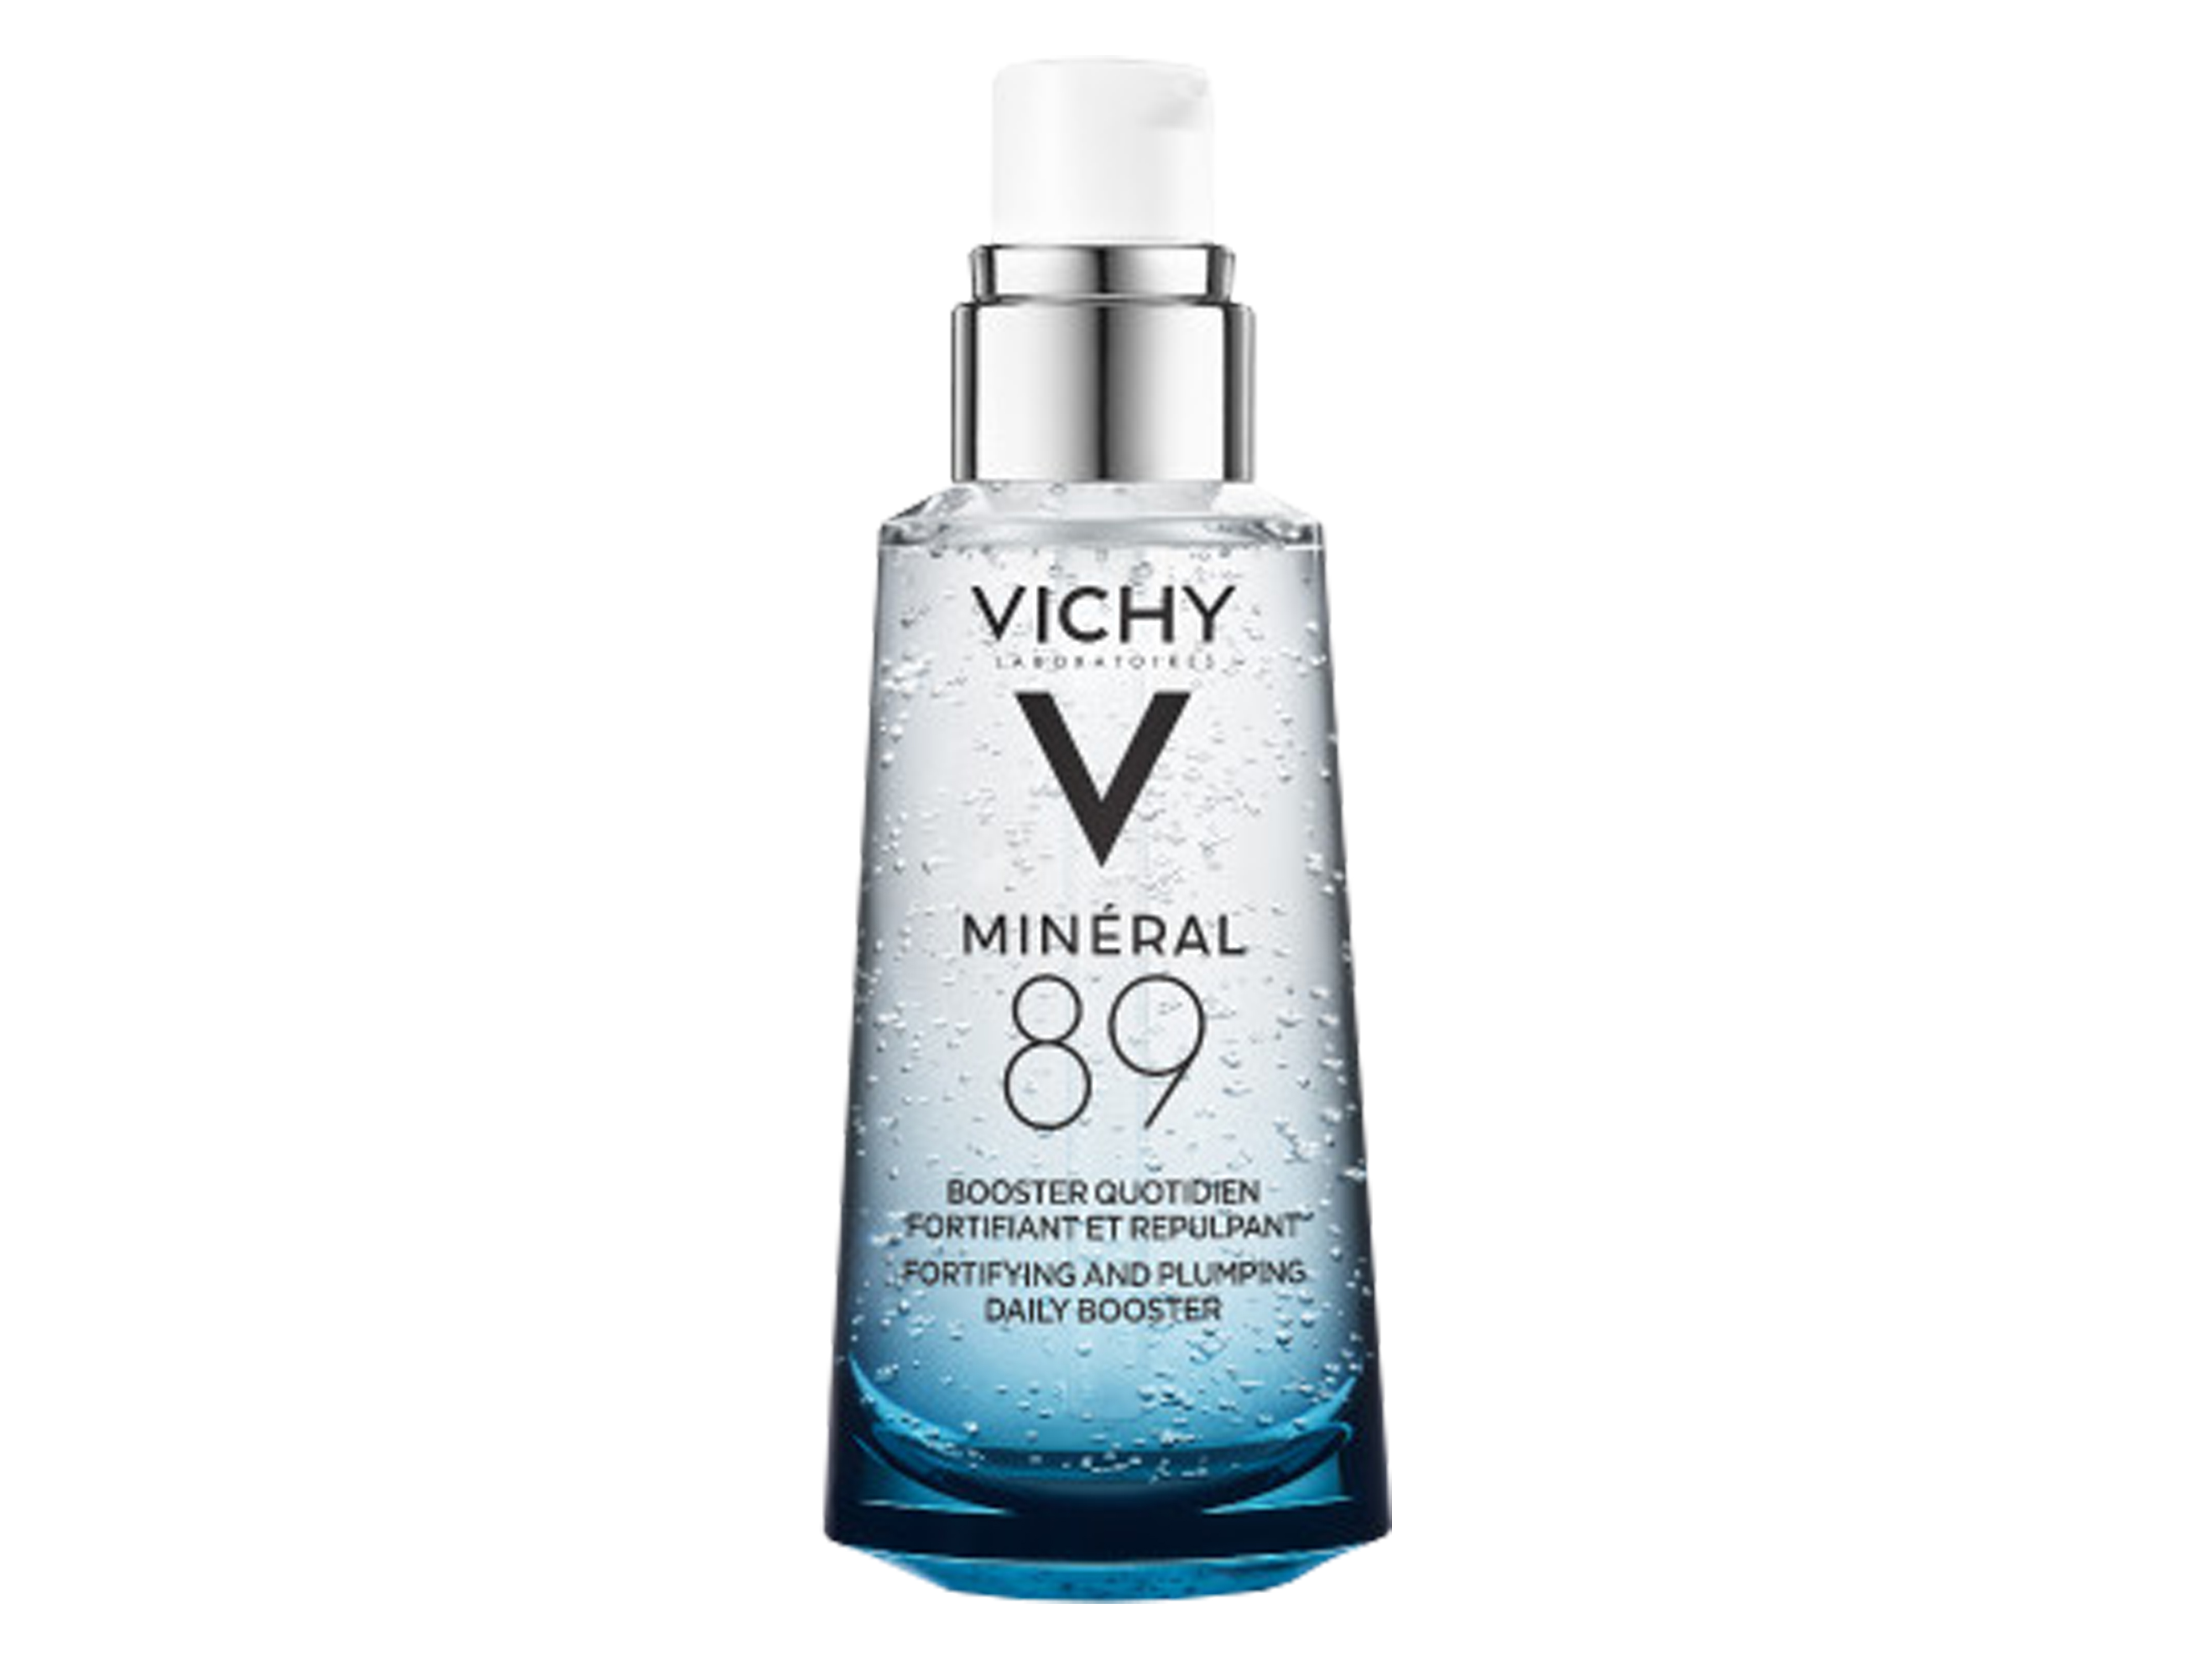 Vichy Mineral 89 Booster, 50 ml